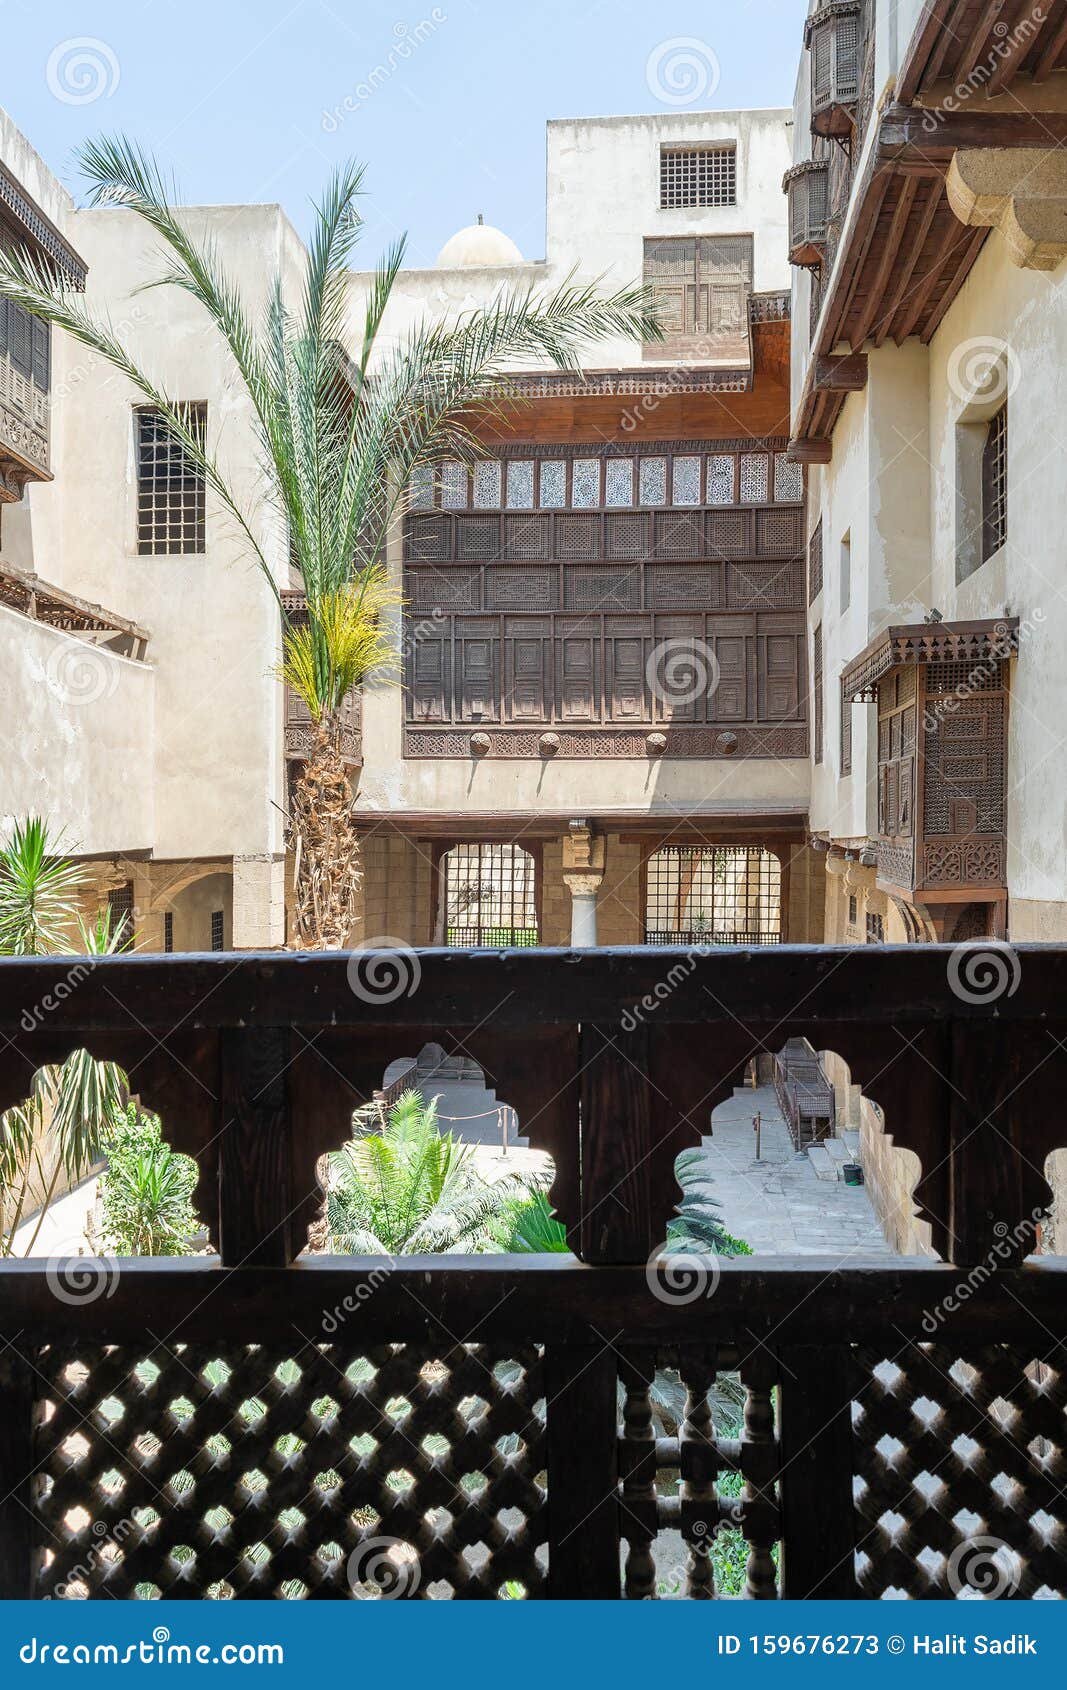 patio of ottoman era beit el sehemy historic building framed by wooden balustrade, cairo, egypt